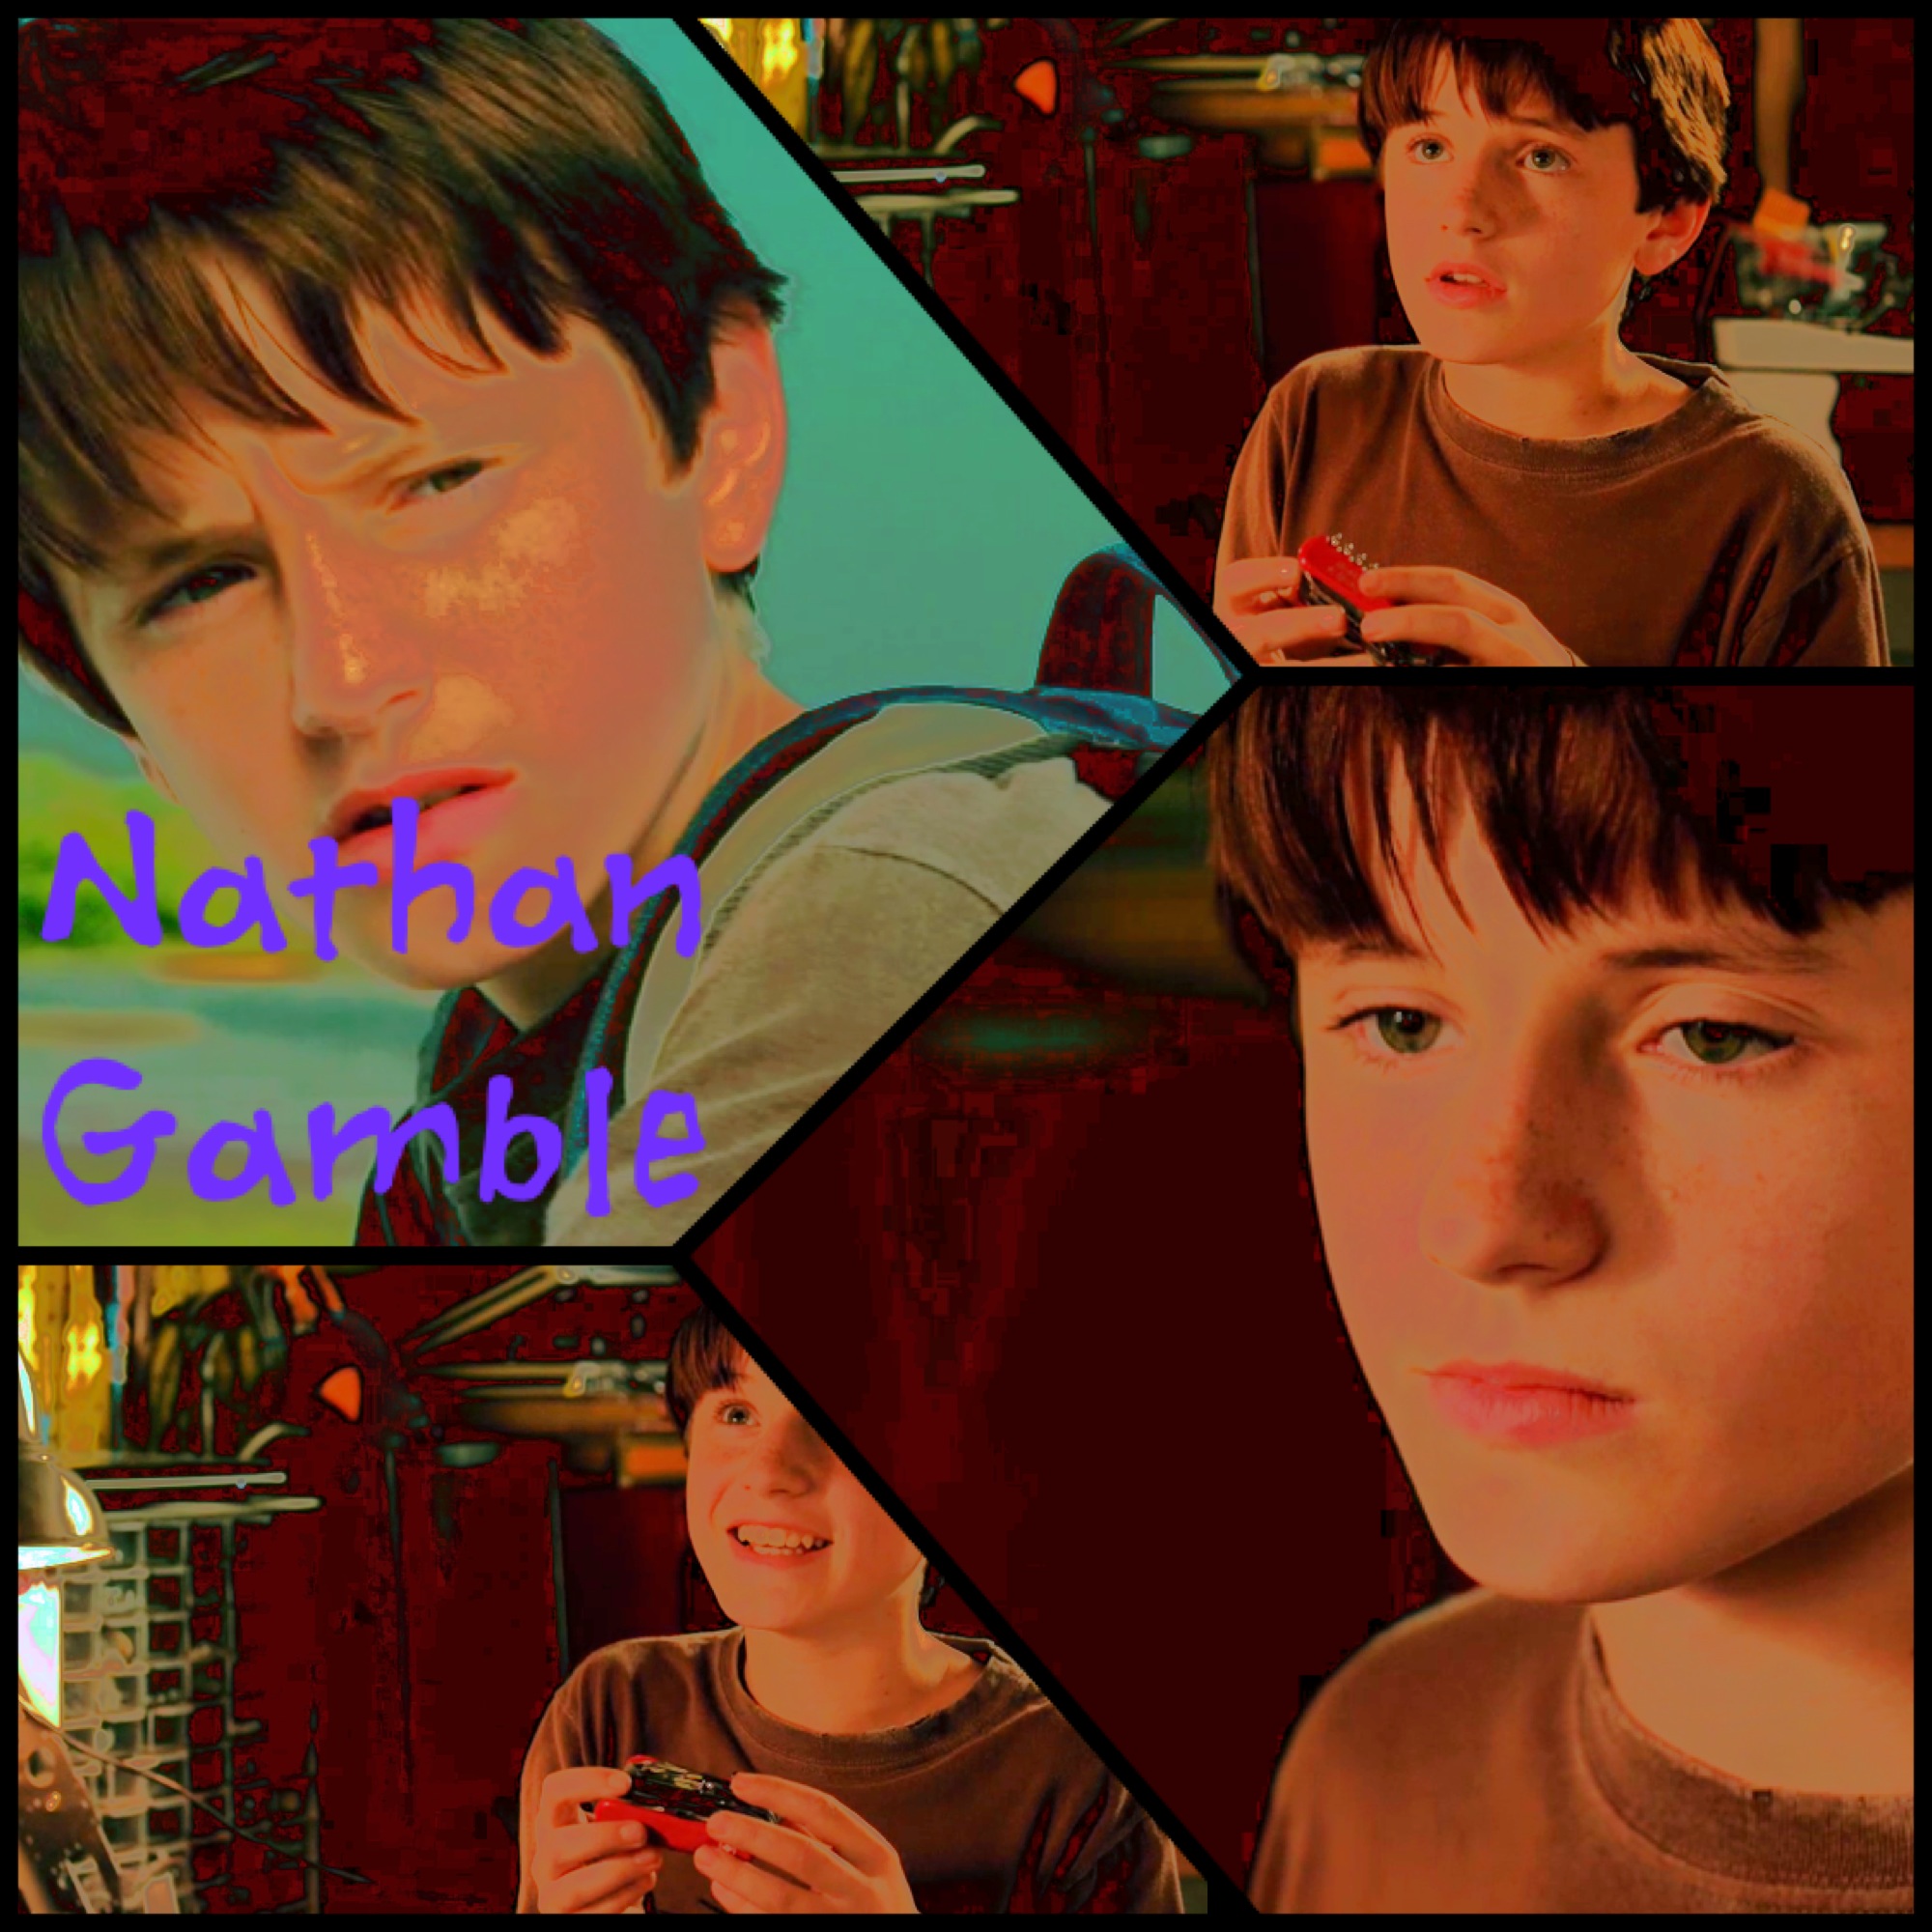 Nathan Gamble in Fan Creations